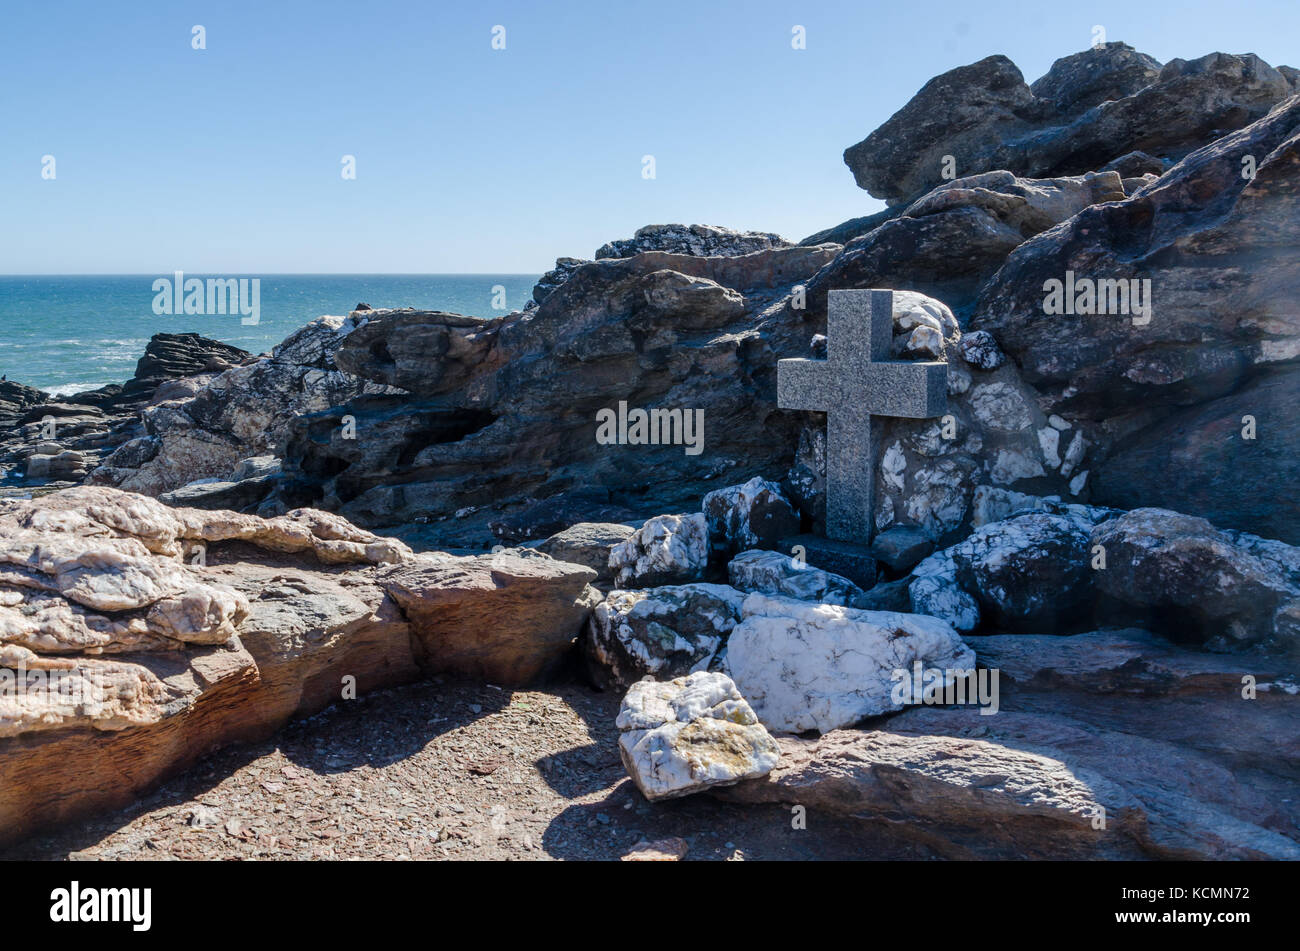 Unnamed grave and cross in natural setting between rocks with sea in background, Luderitz Peninsula, Namibia, Africa Stock Photo